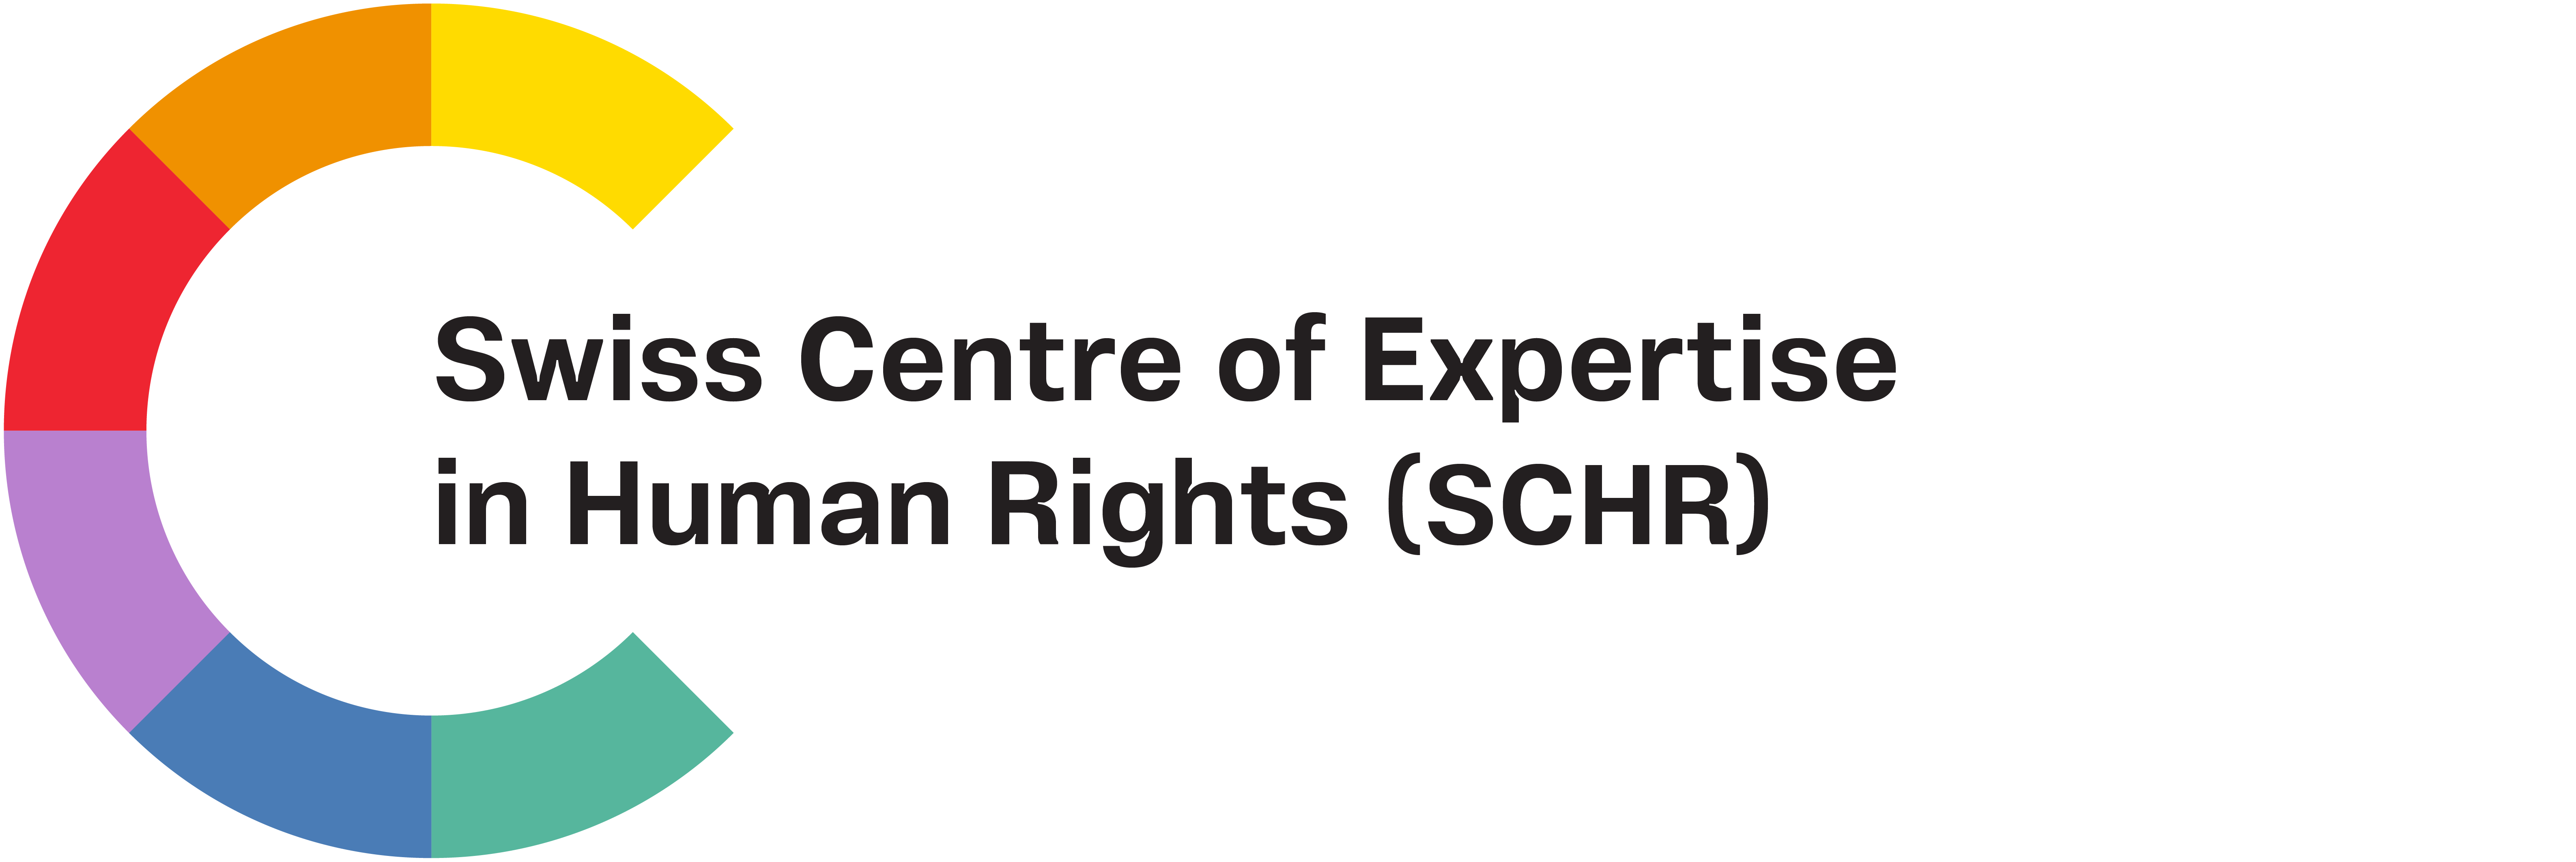 Swiss Centre of Expertise in Human Rights (SCHR)